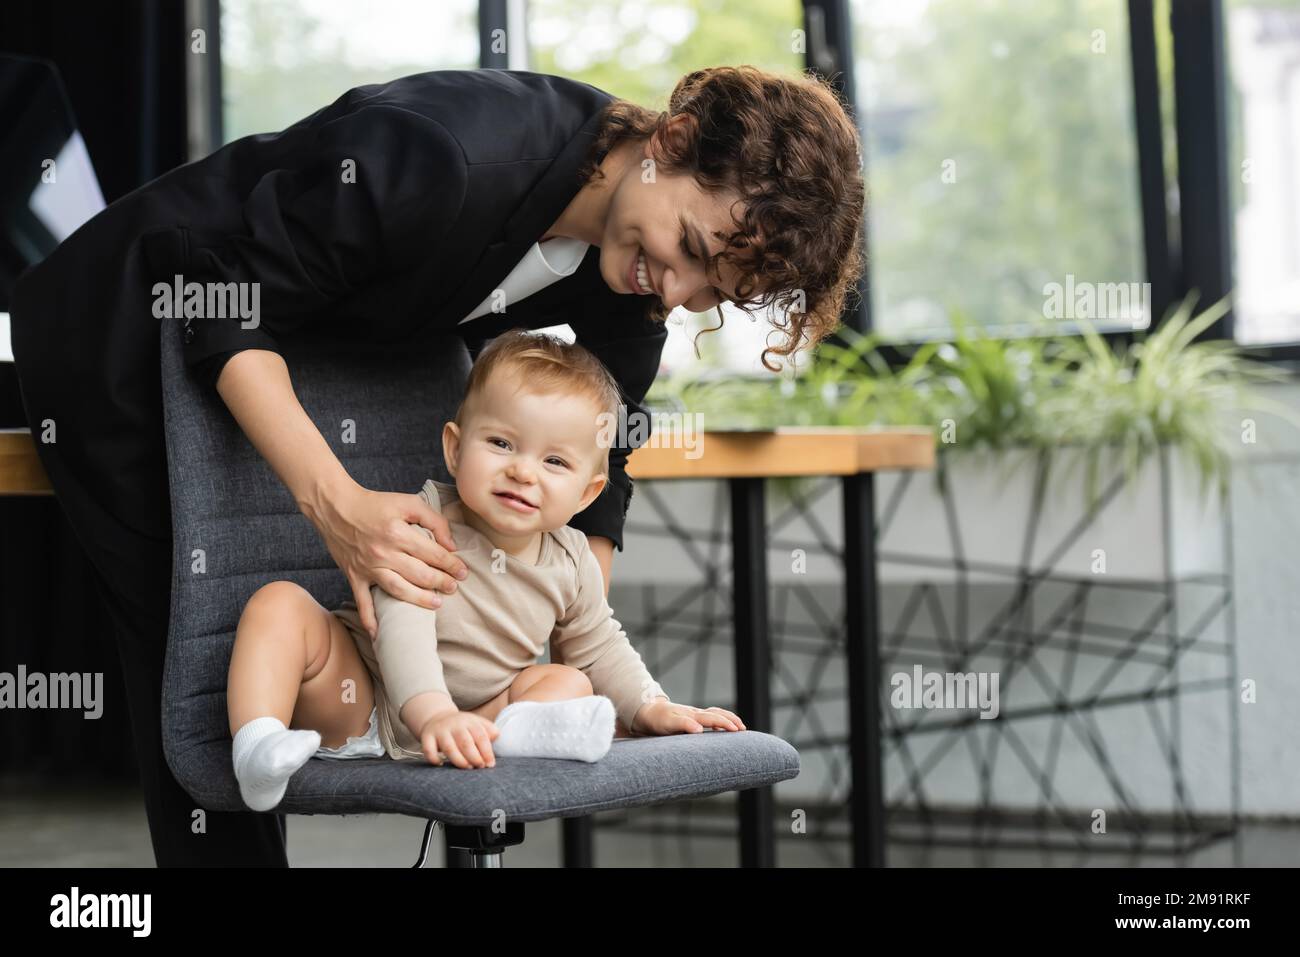 cheerful baby in romper sitting on office chair near smiling mother in formal wear,stock image Stock Photo